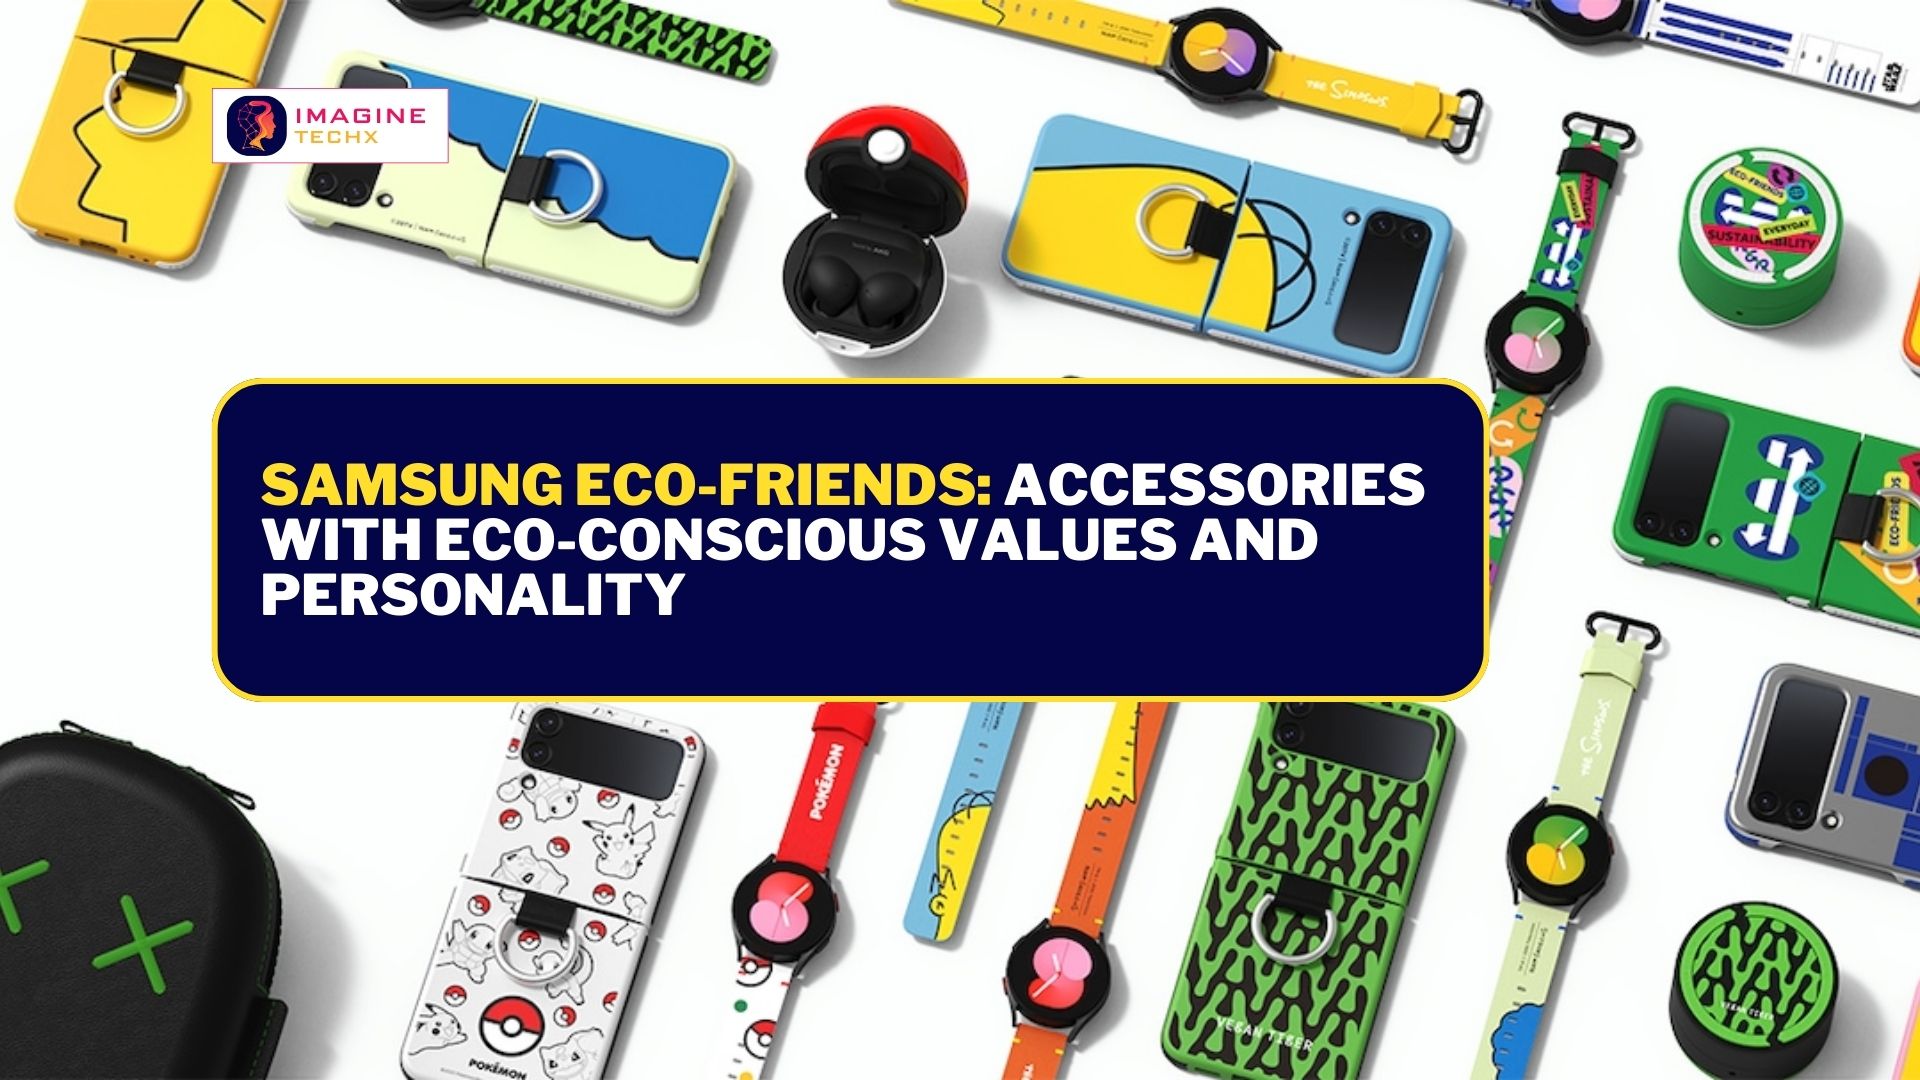 Samsung Eco-Friends: Accessories With Eco-Conscious Values and Personality